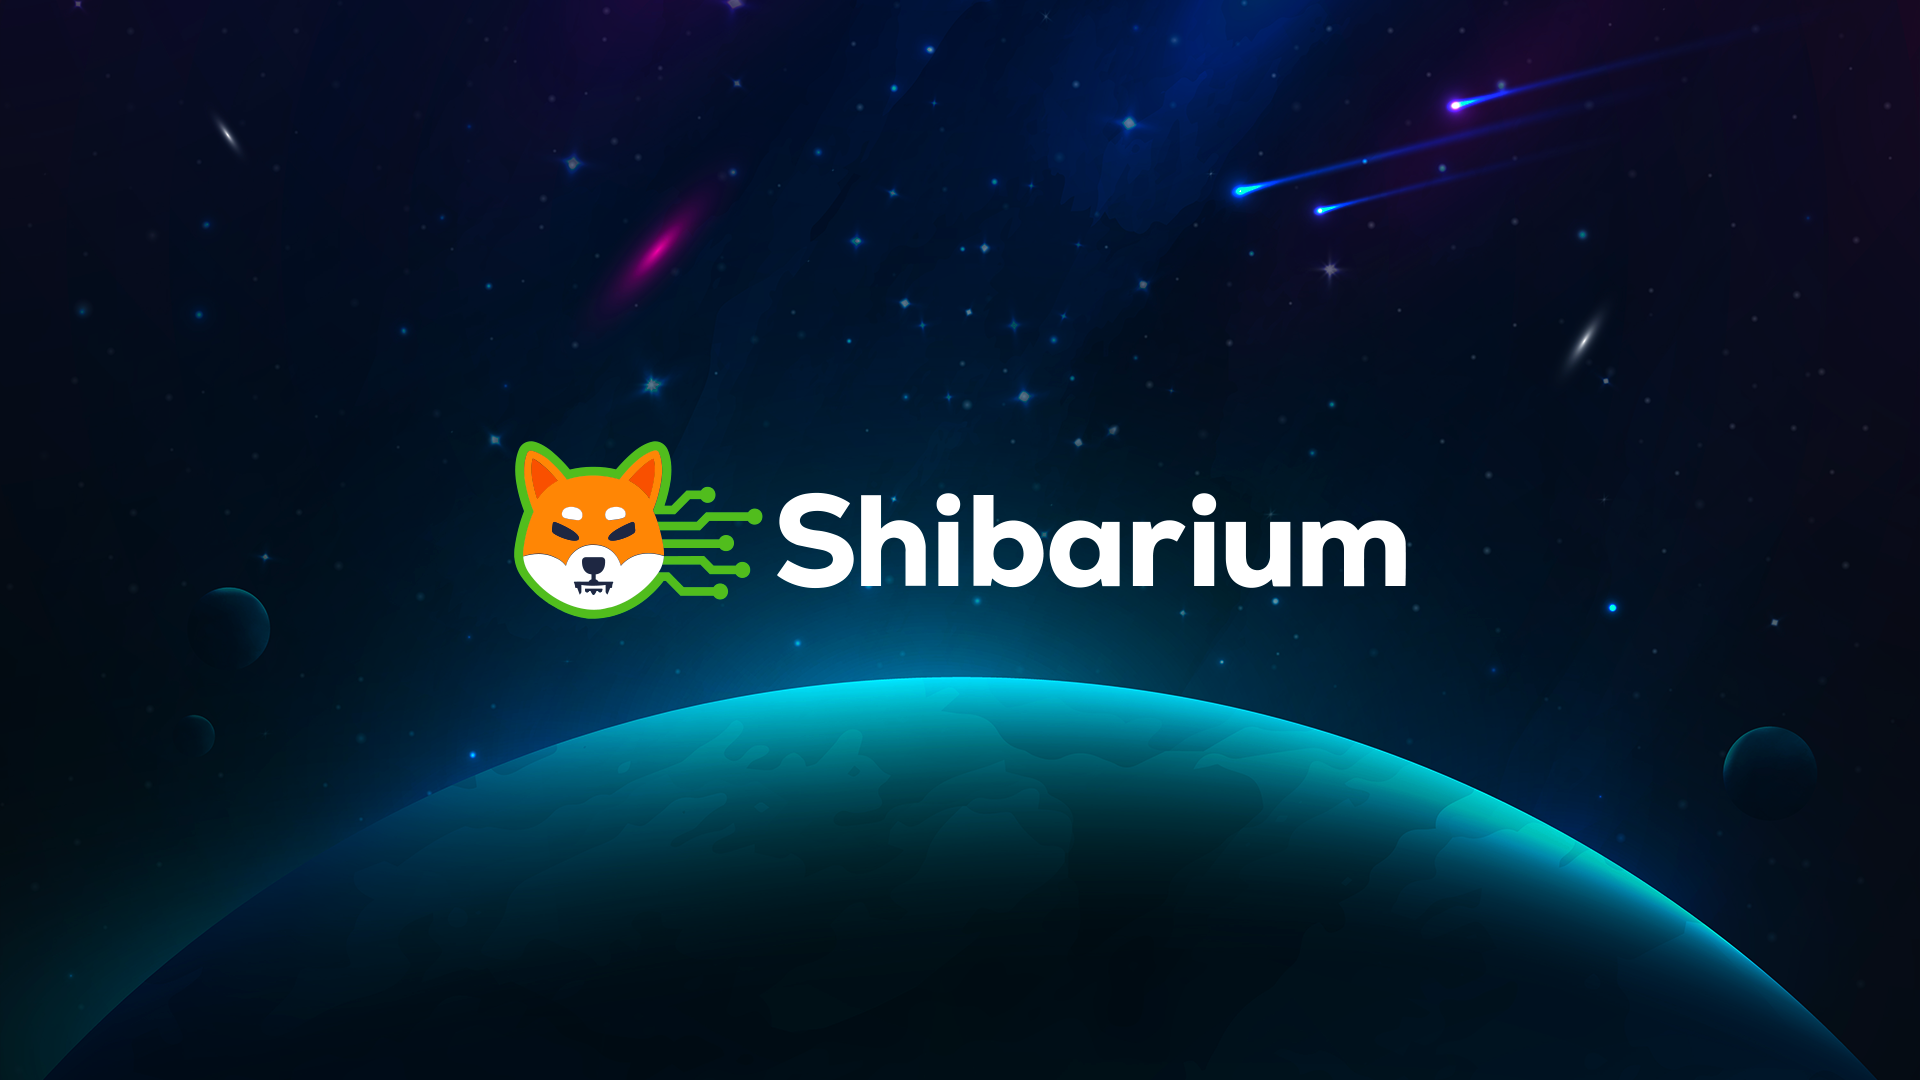 Shibarium Achieves New Milestones, Surges with 100% Spike in Daily Transactions